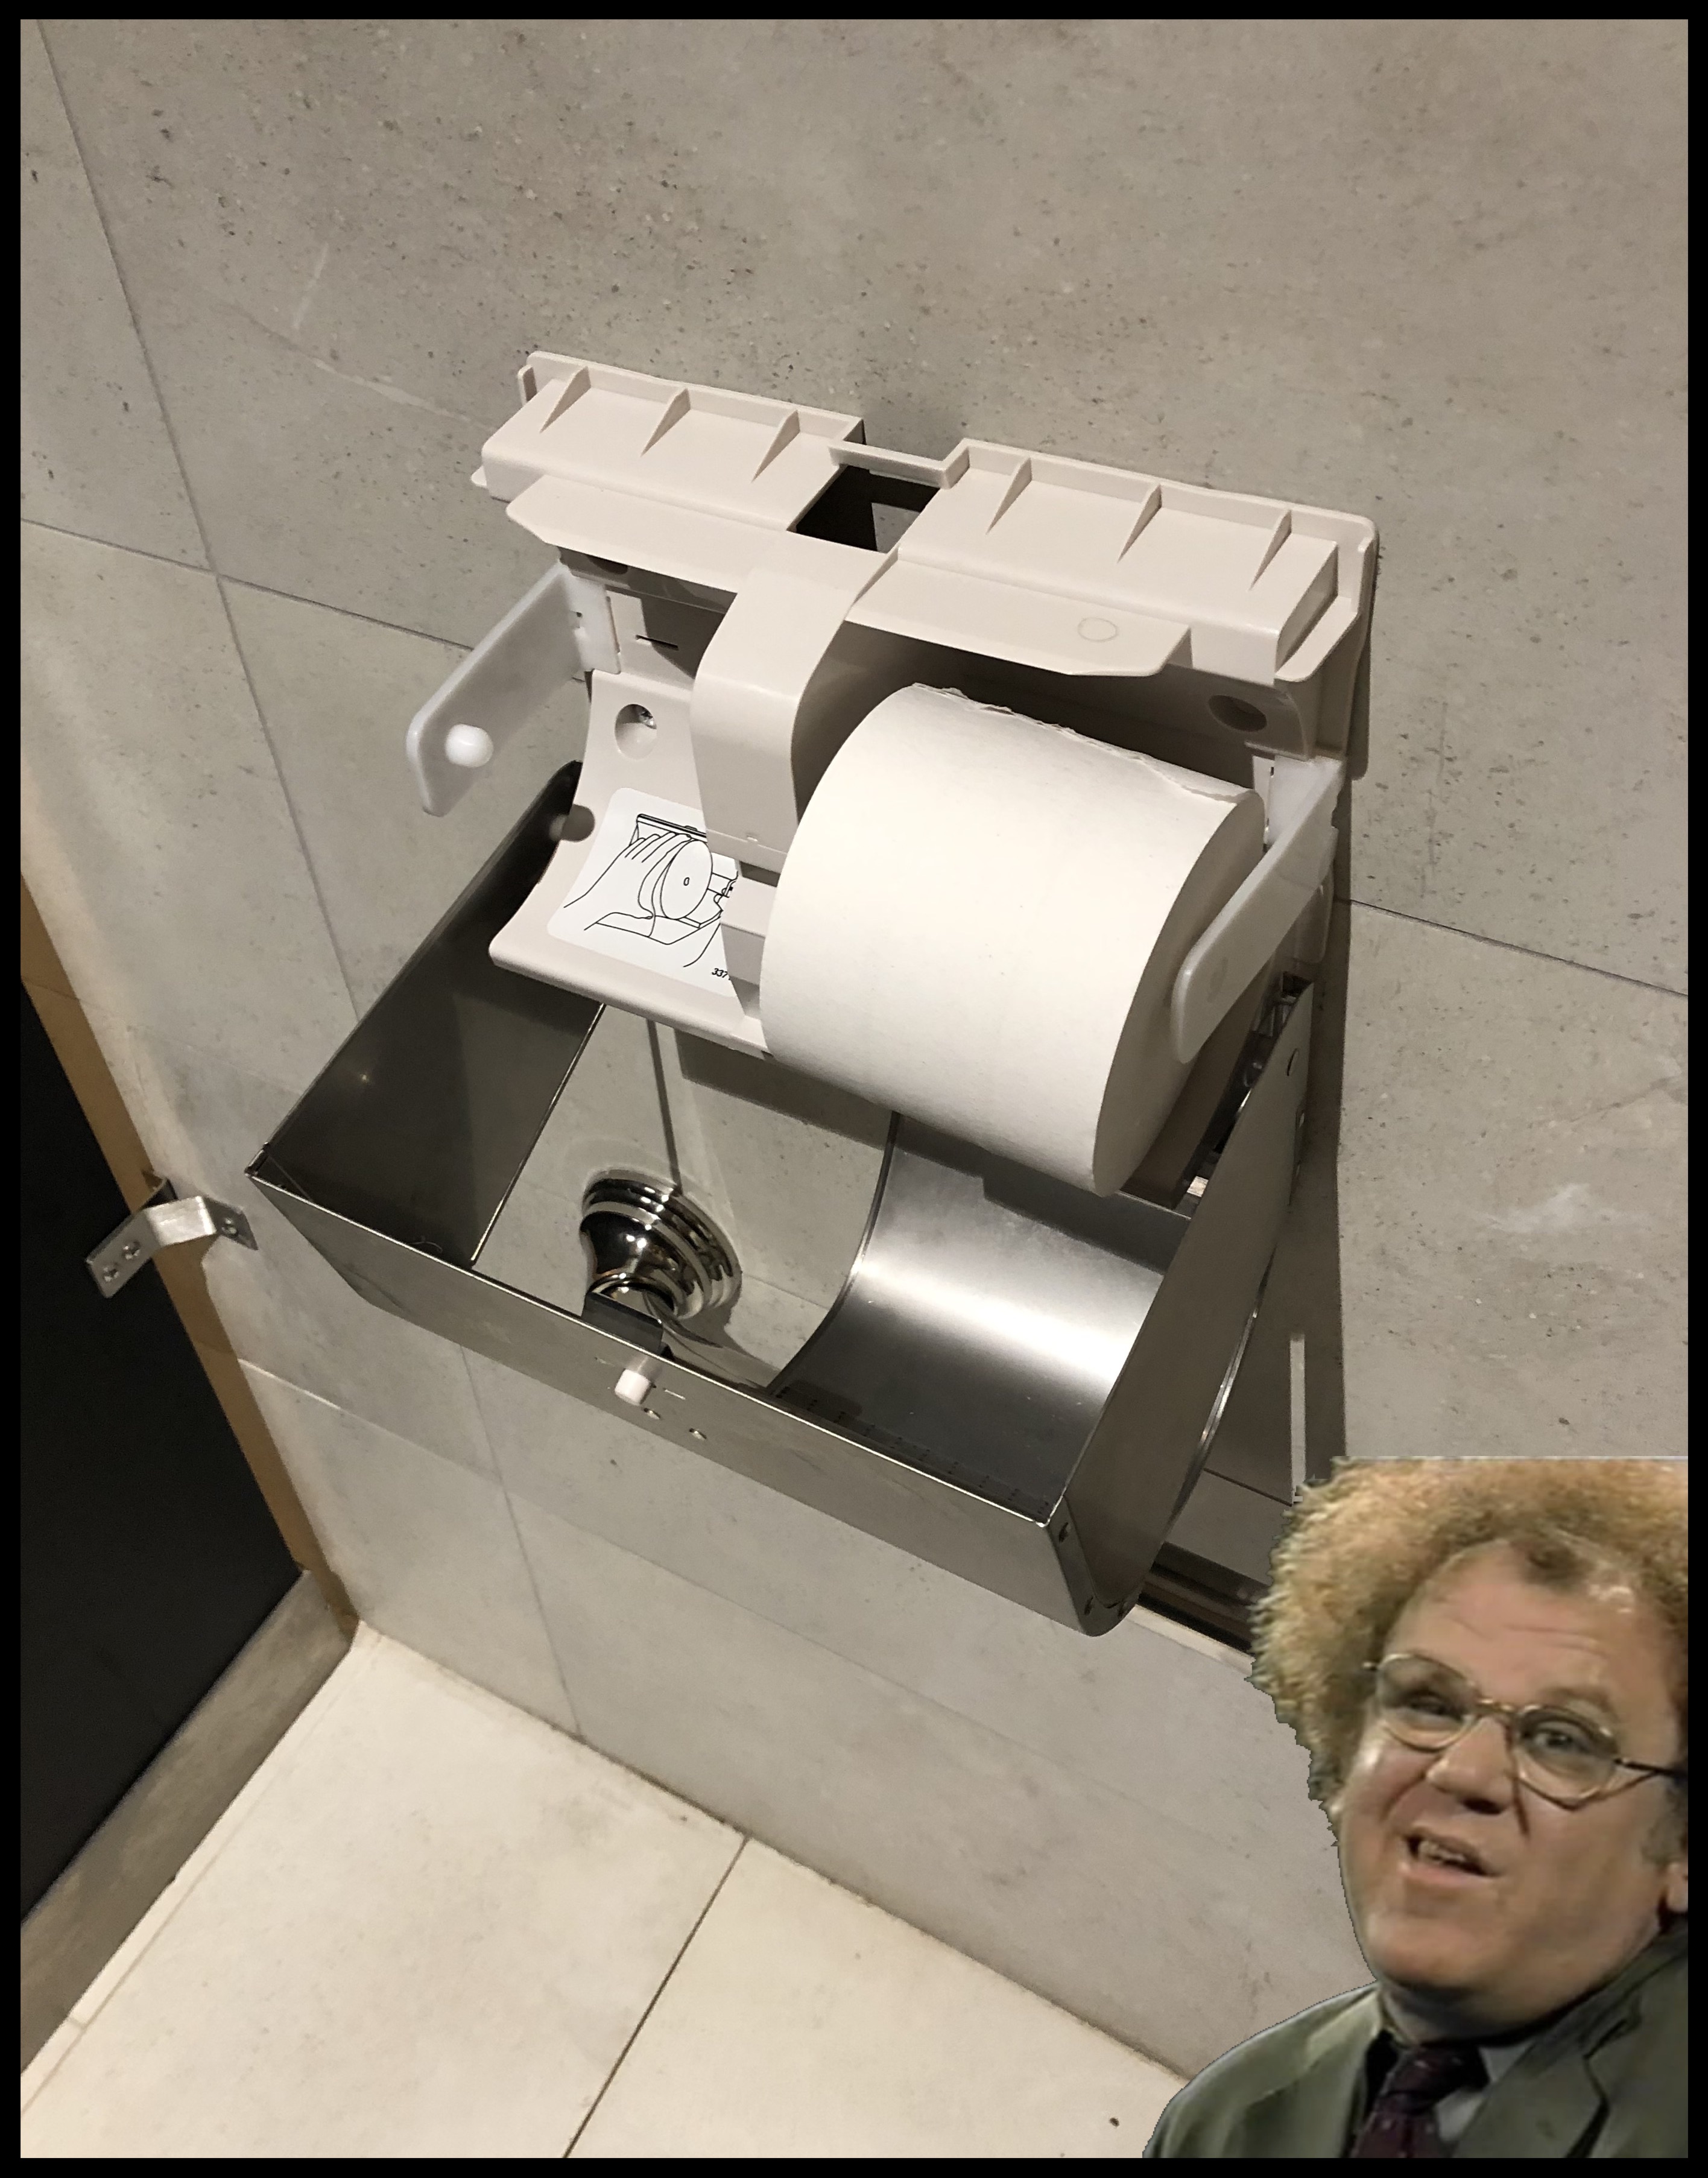 The T.P. dispenser unlocked and hanging open with Steve Brule next to it looking dopey. 